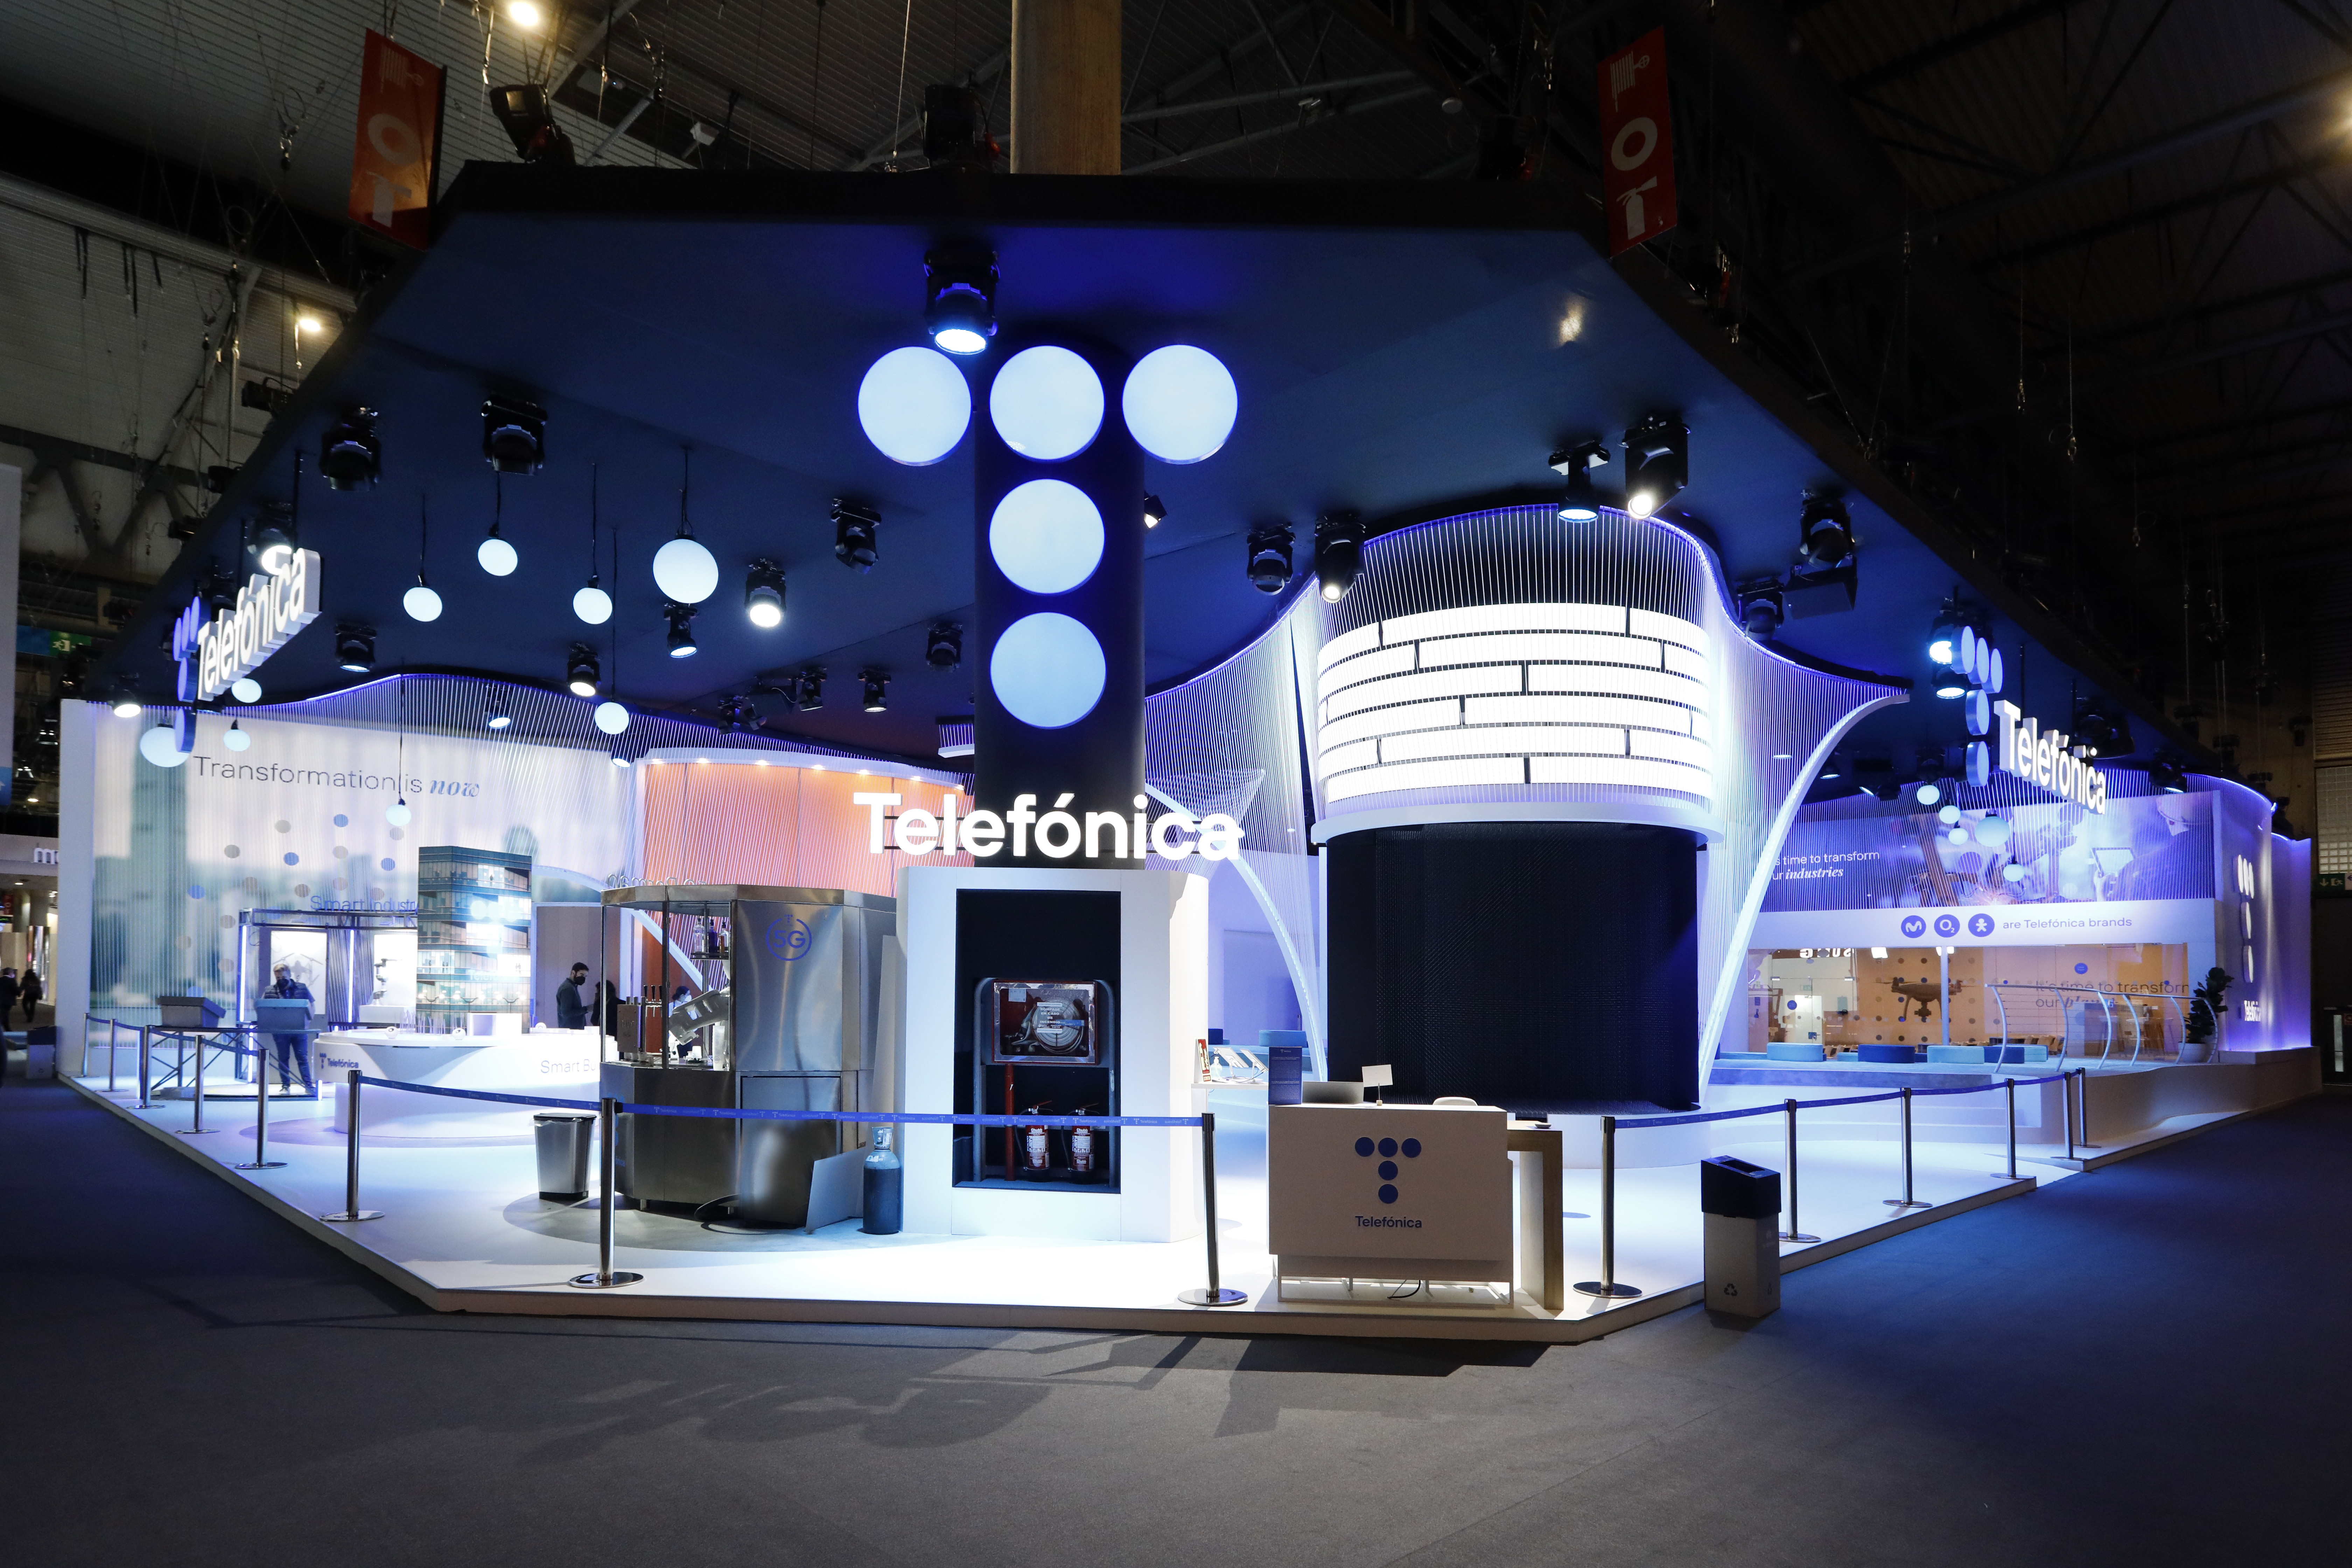 Telefónica Stand at MWC 2022 - @Arduino Vannucchi